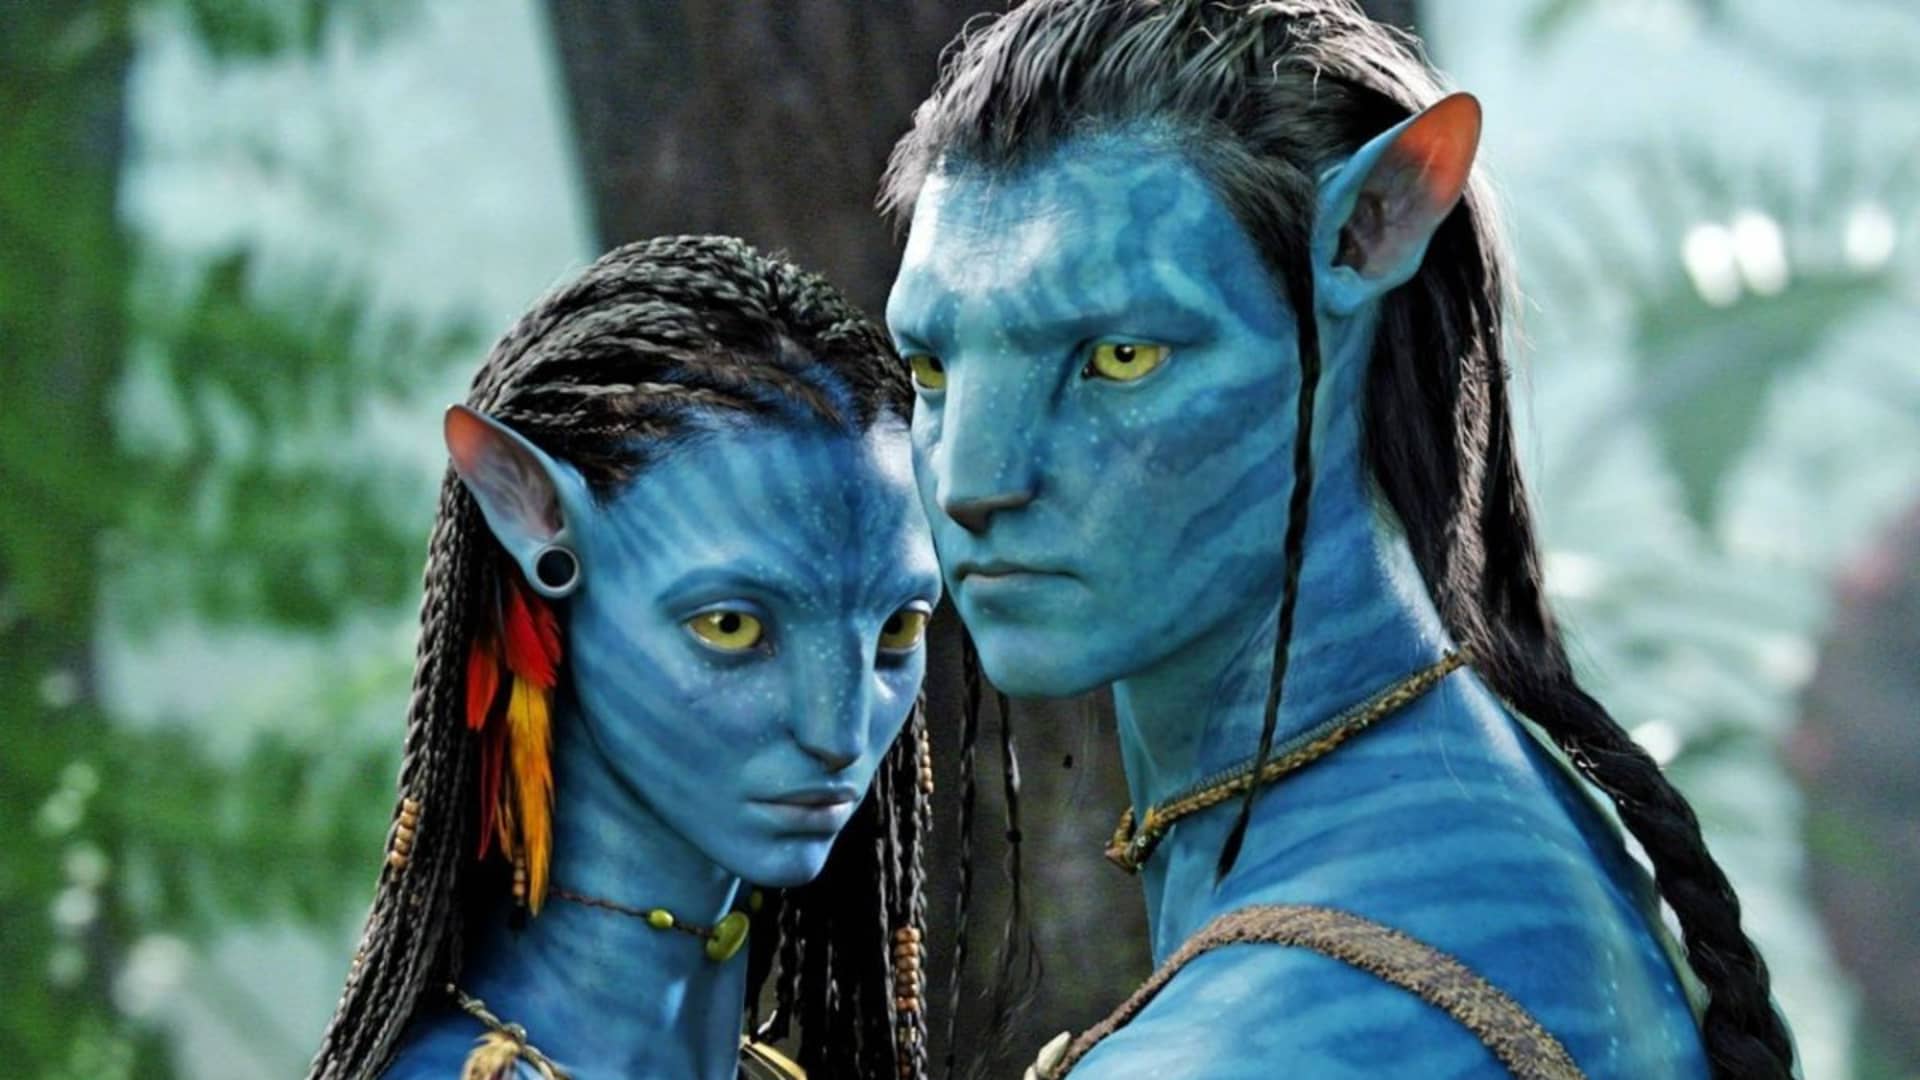 ‘Avatar,’ Spider-Man and Star Wars return to the big screen as summer box office winds down